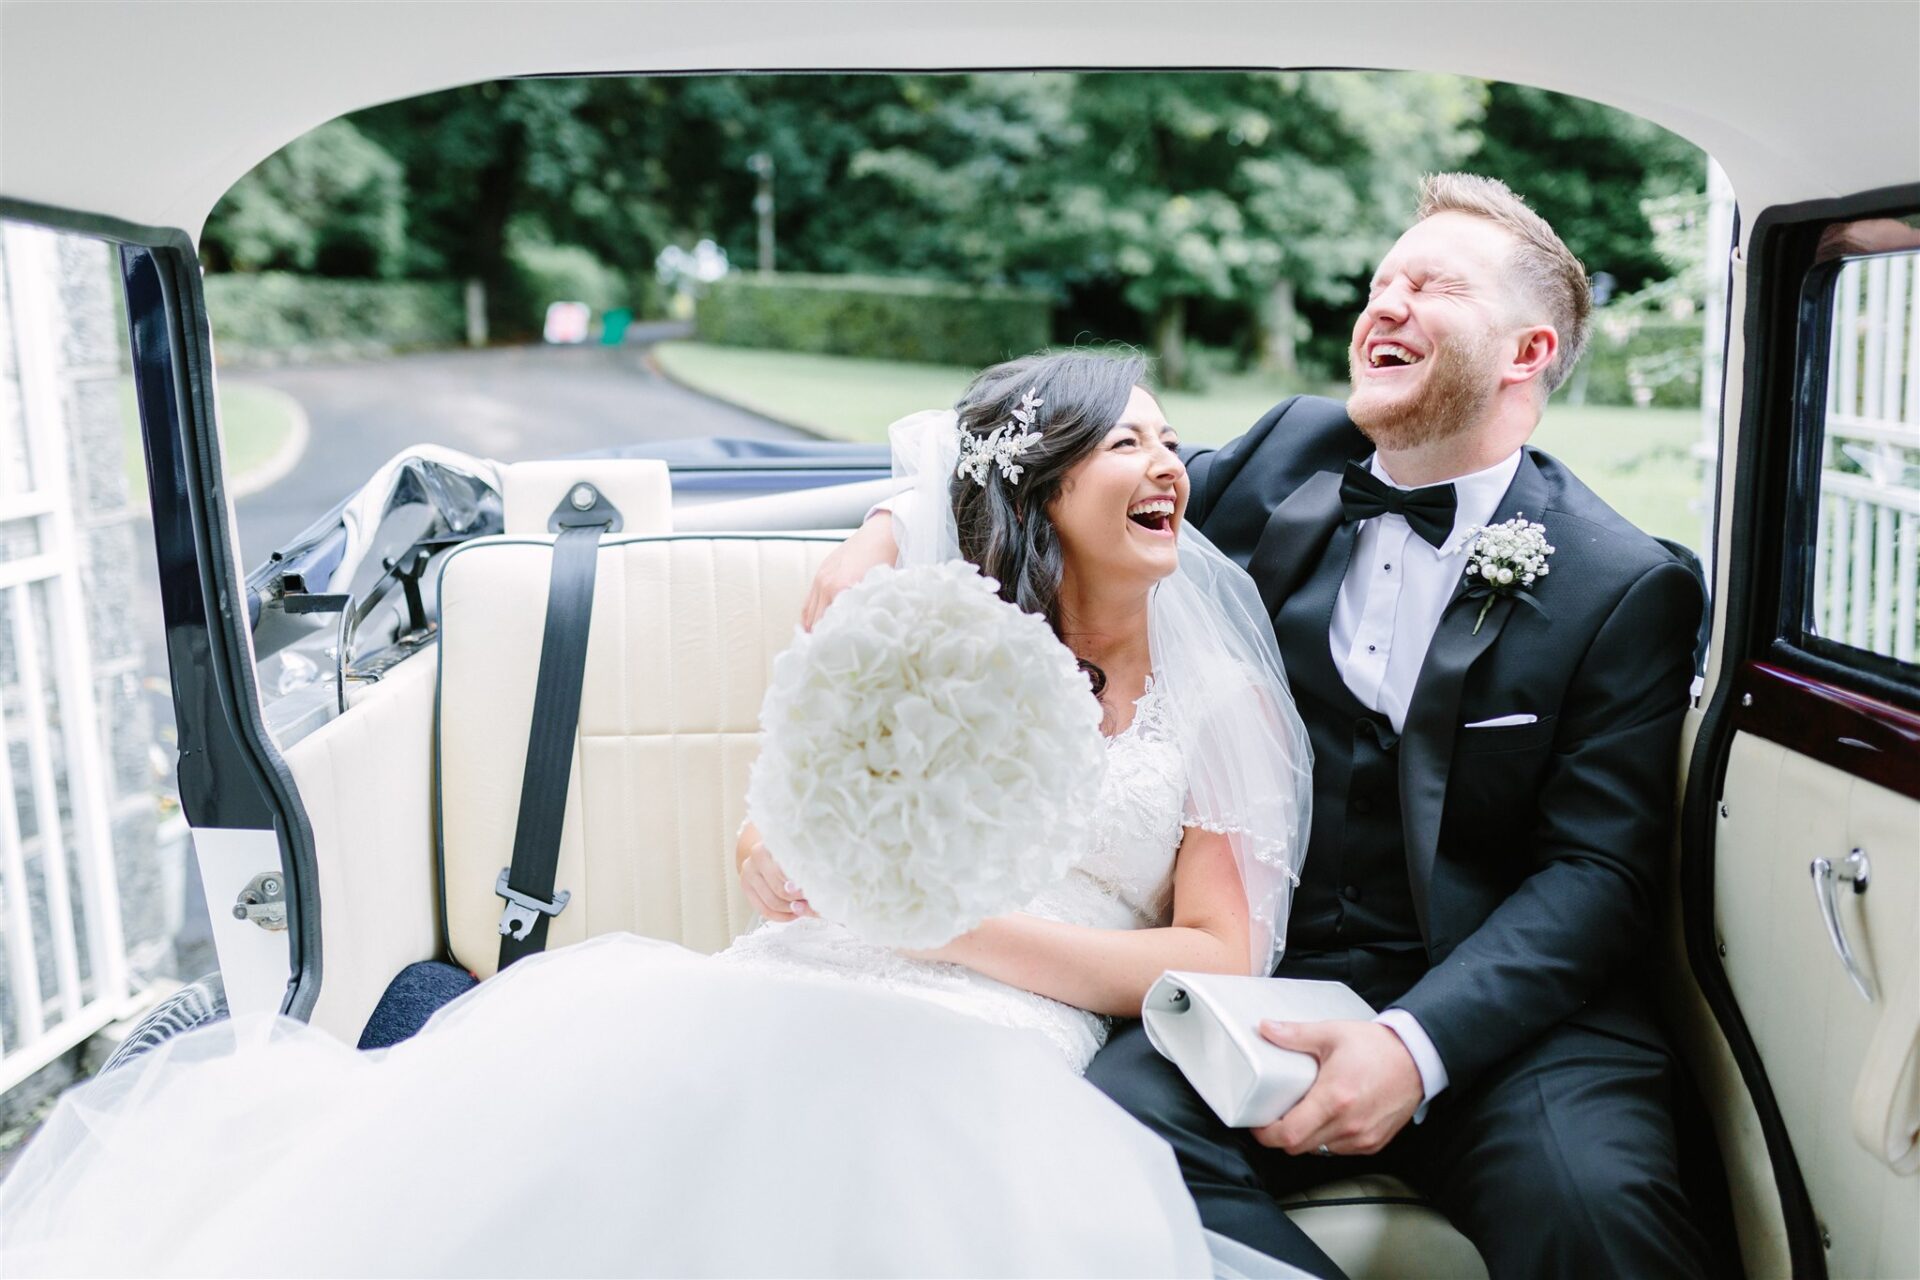 Bride and groom laughing in wedding car